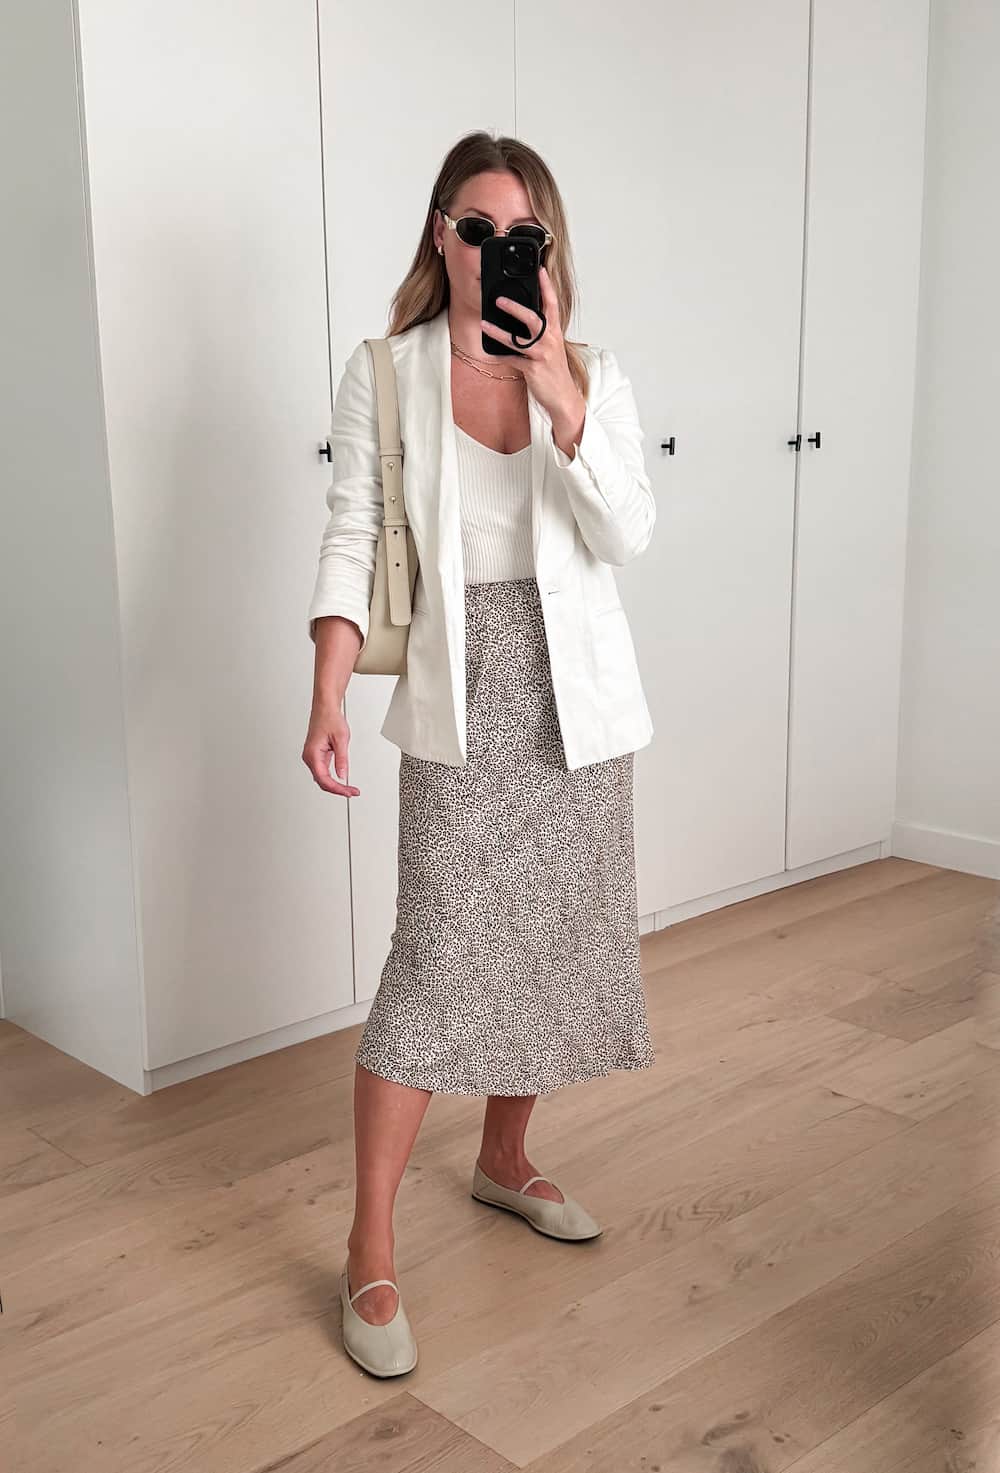 Christal wearing a patterned slip skirt, ballet flats, a white tank top and a white blazer.